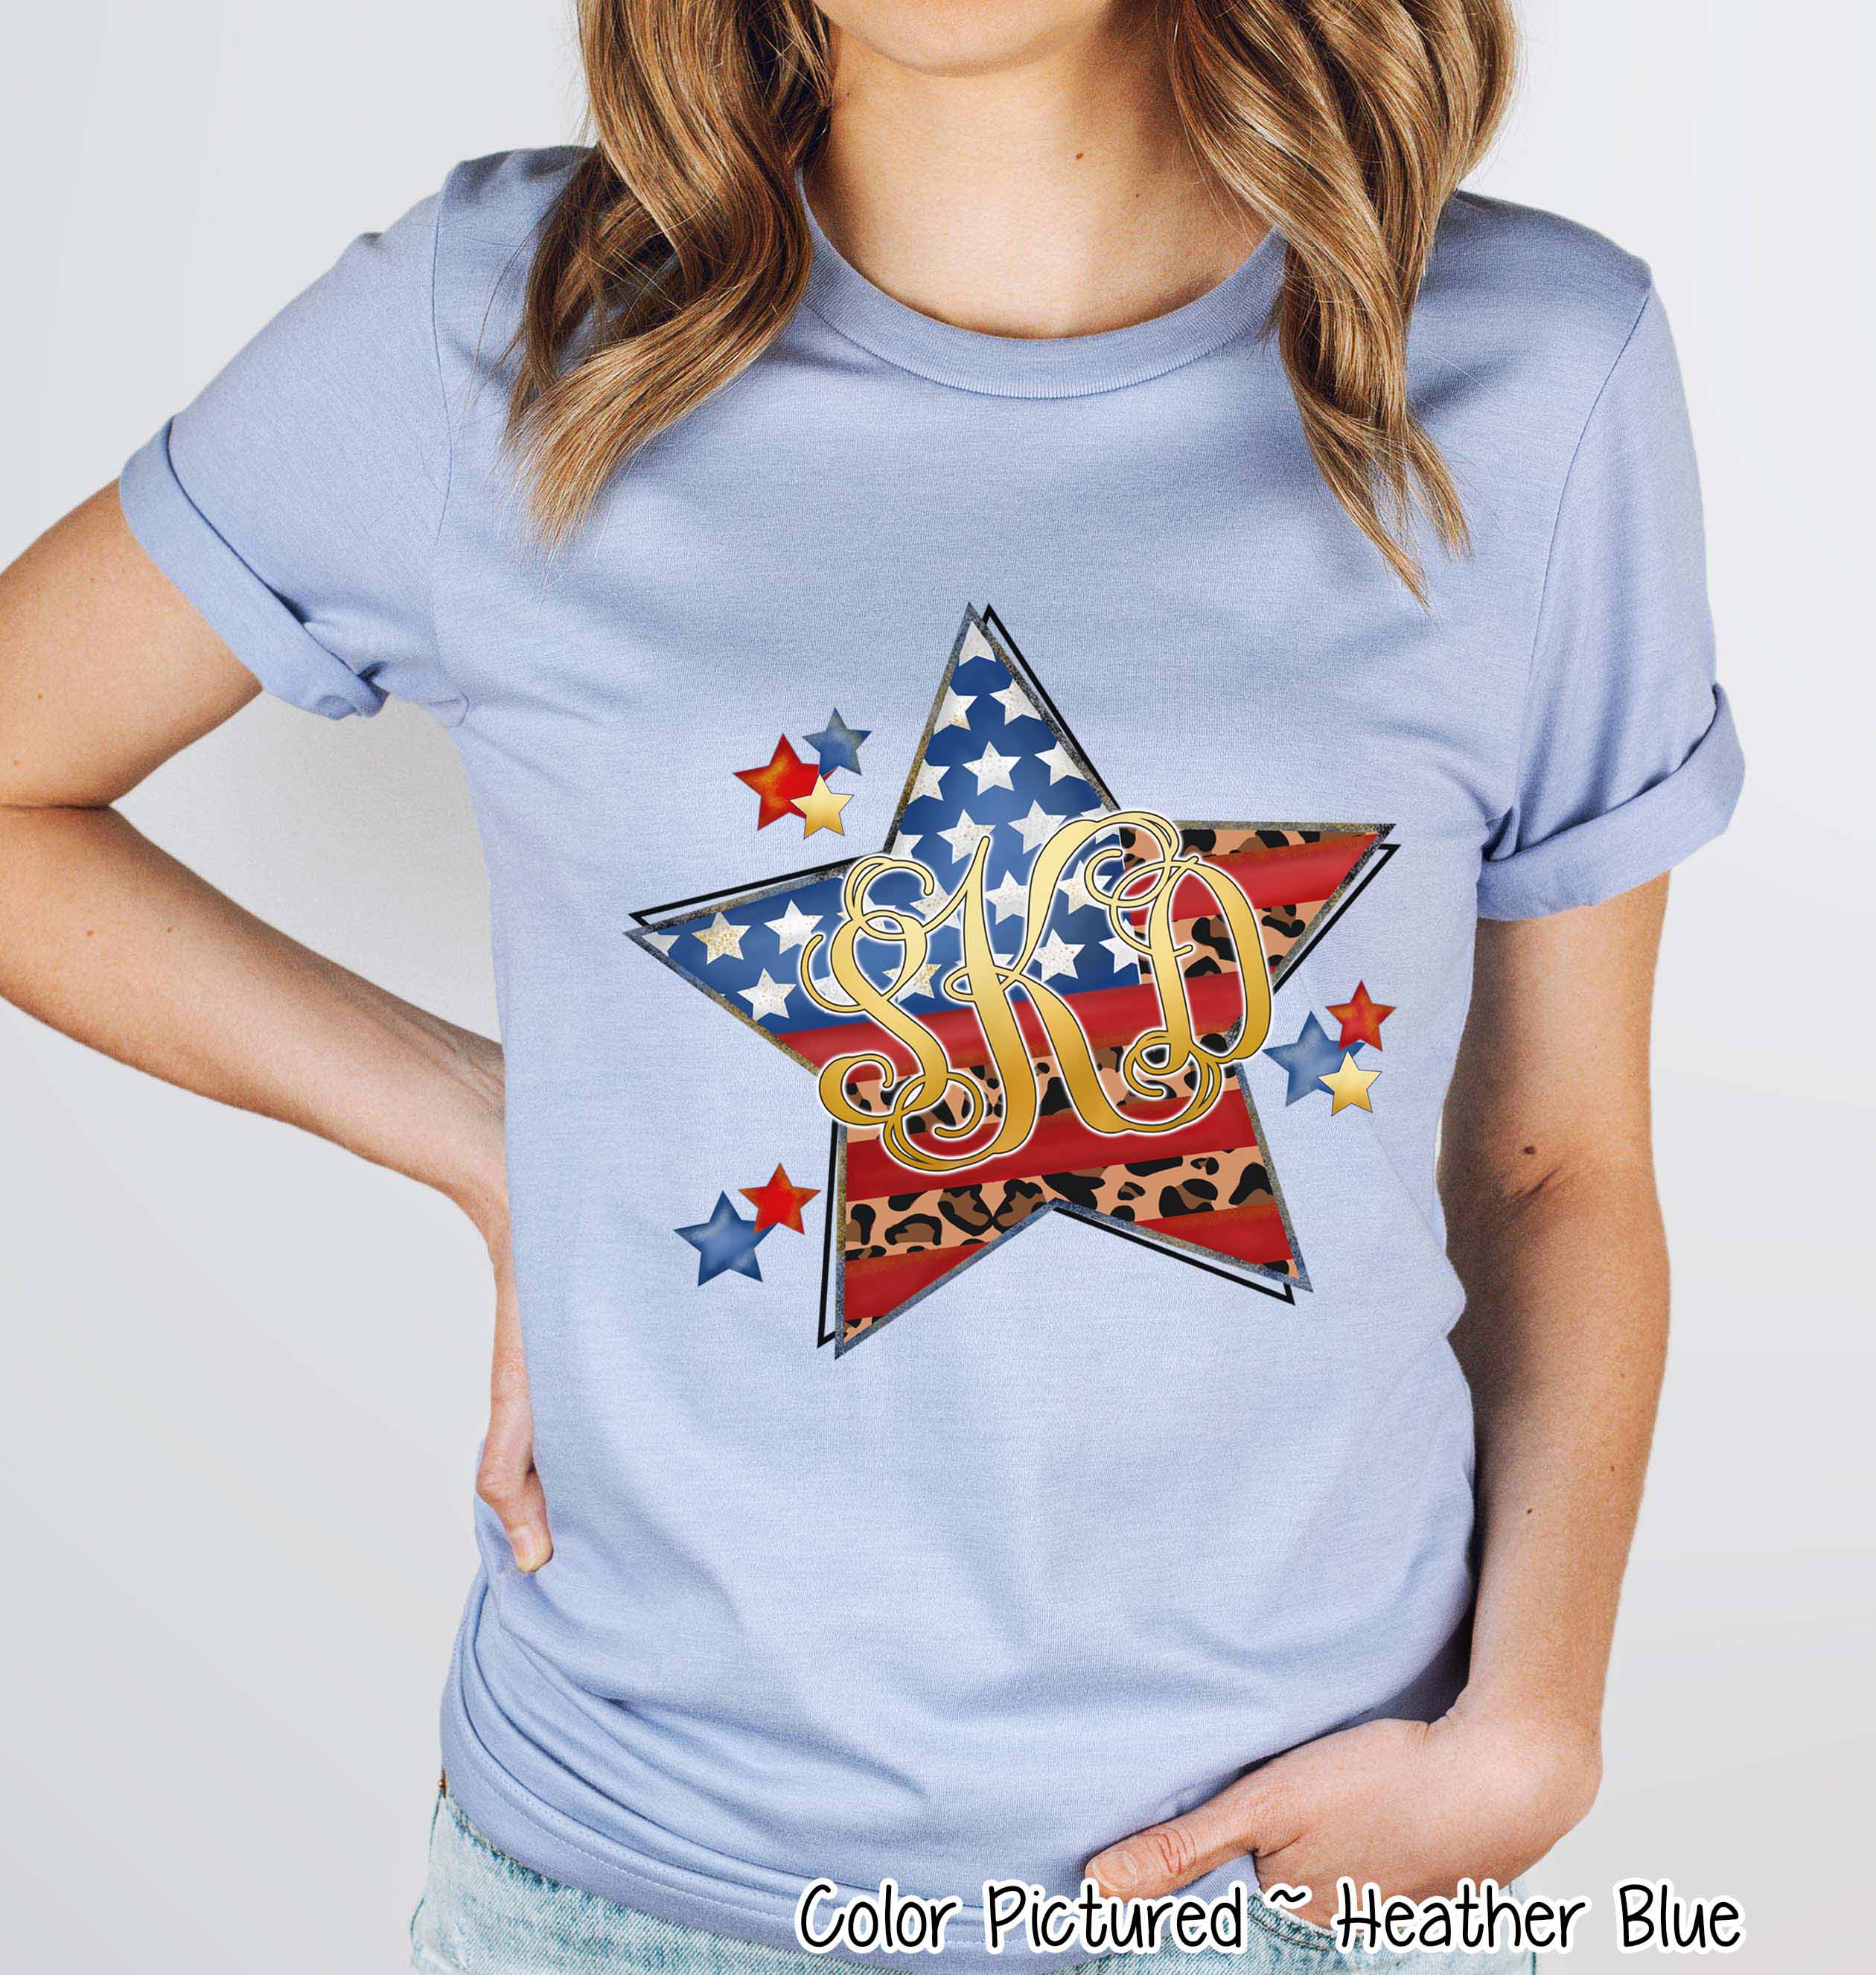 Patriotic Flag Star with Leopard Accents and Monogram Tee